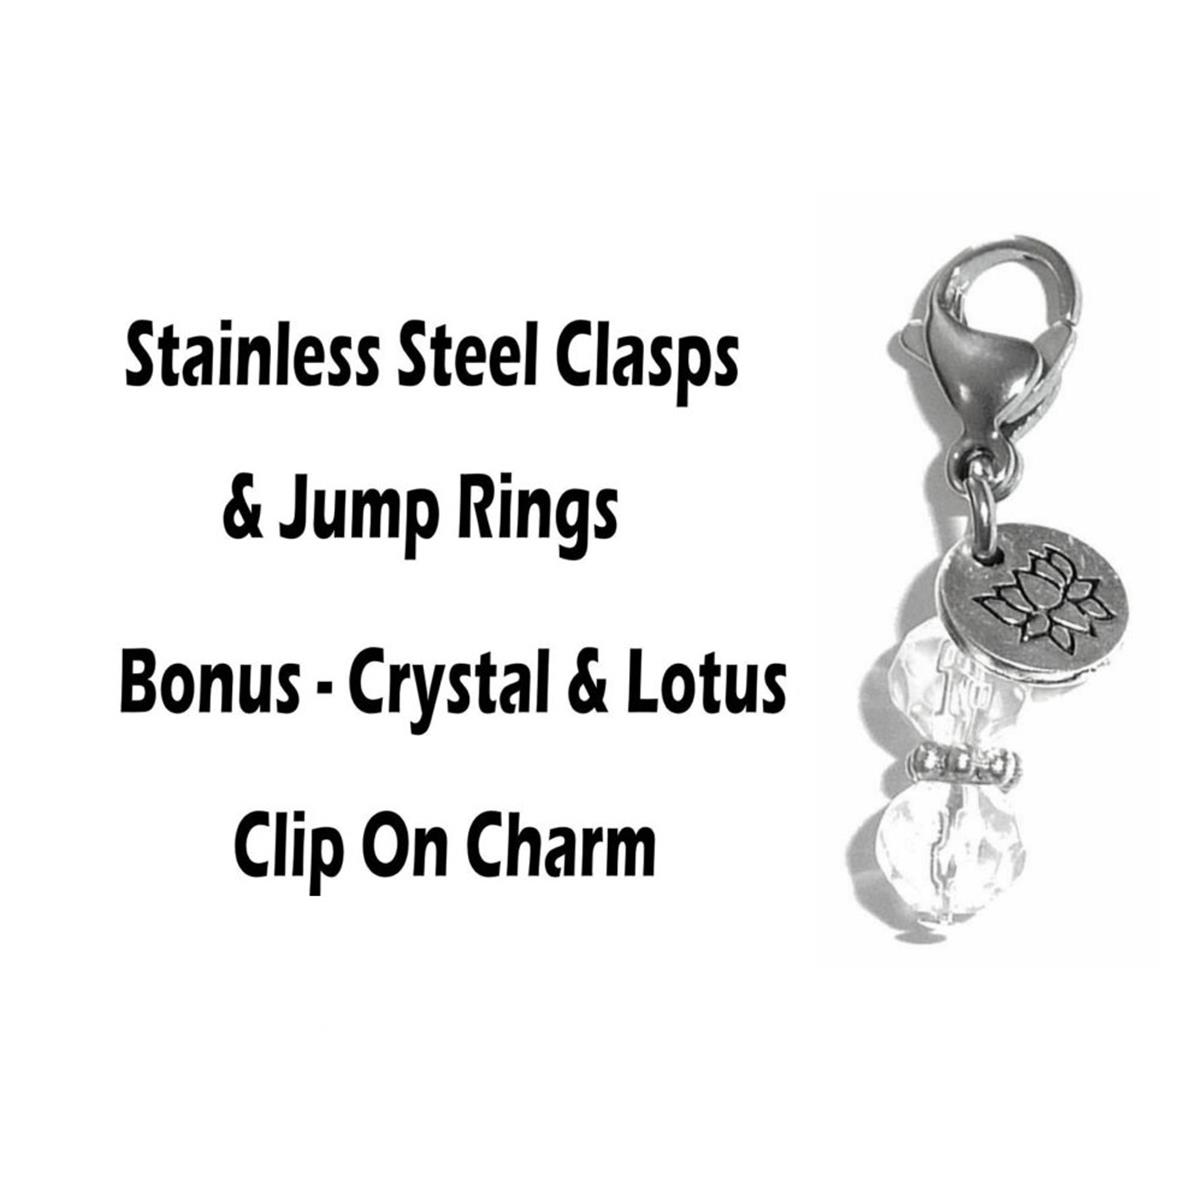 Follow Your Dreams Clip On Charms - Inspirational Charms Clip On Anywhere